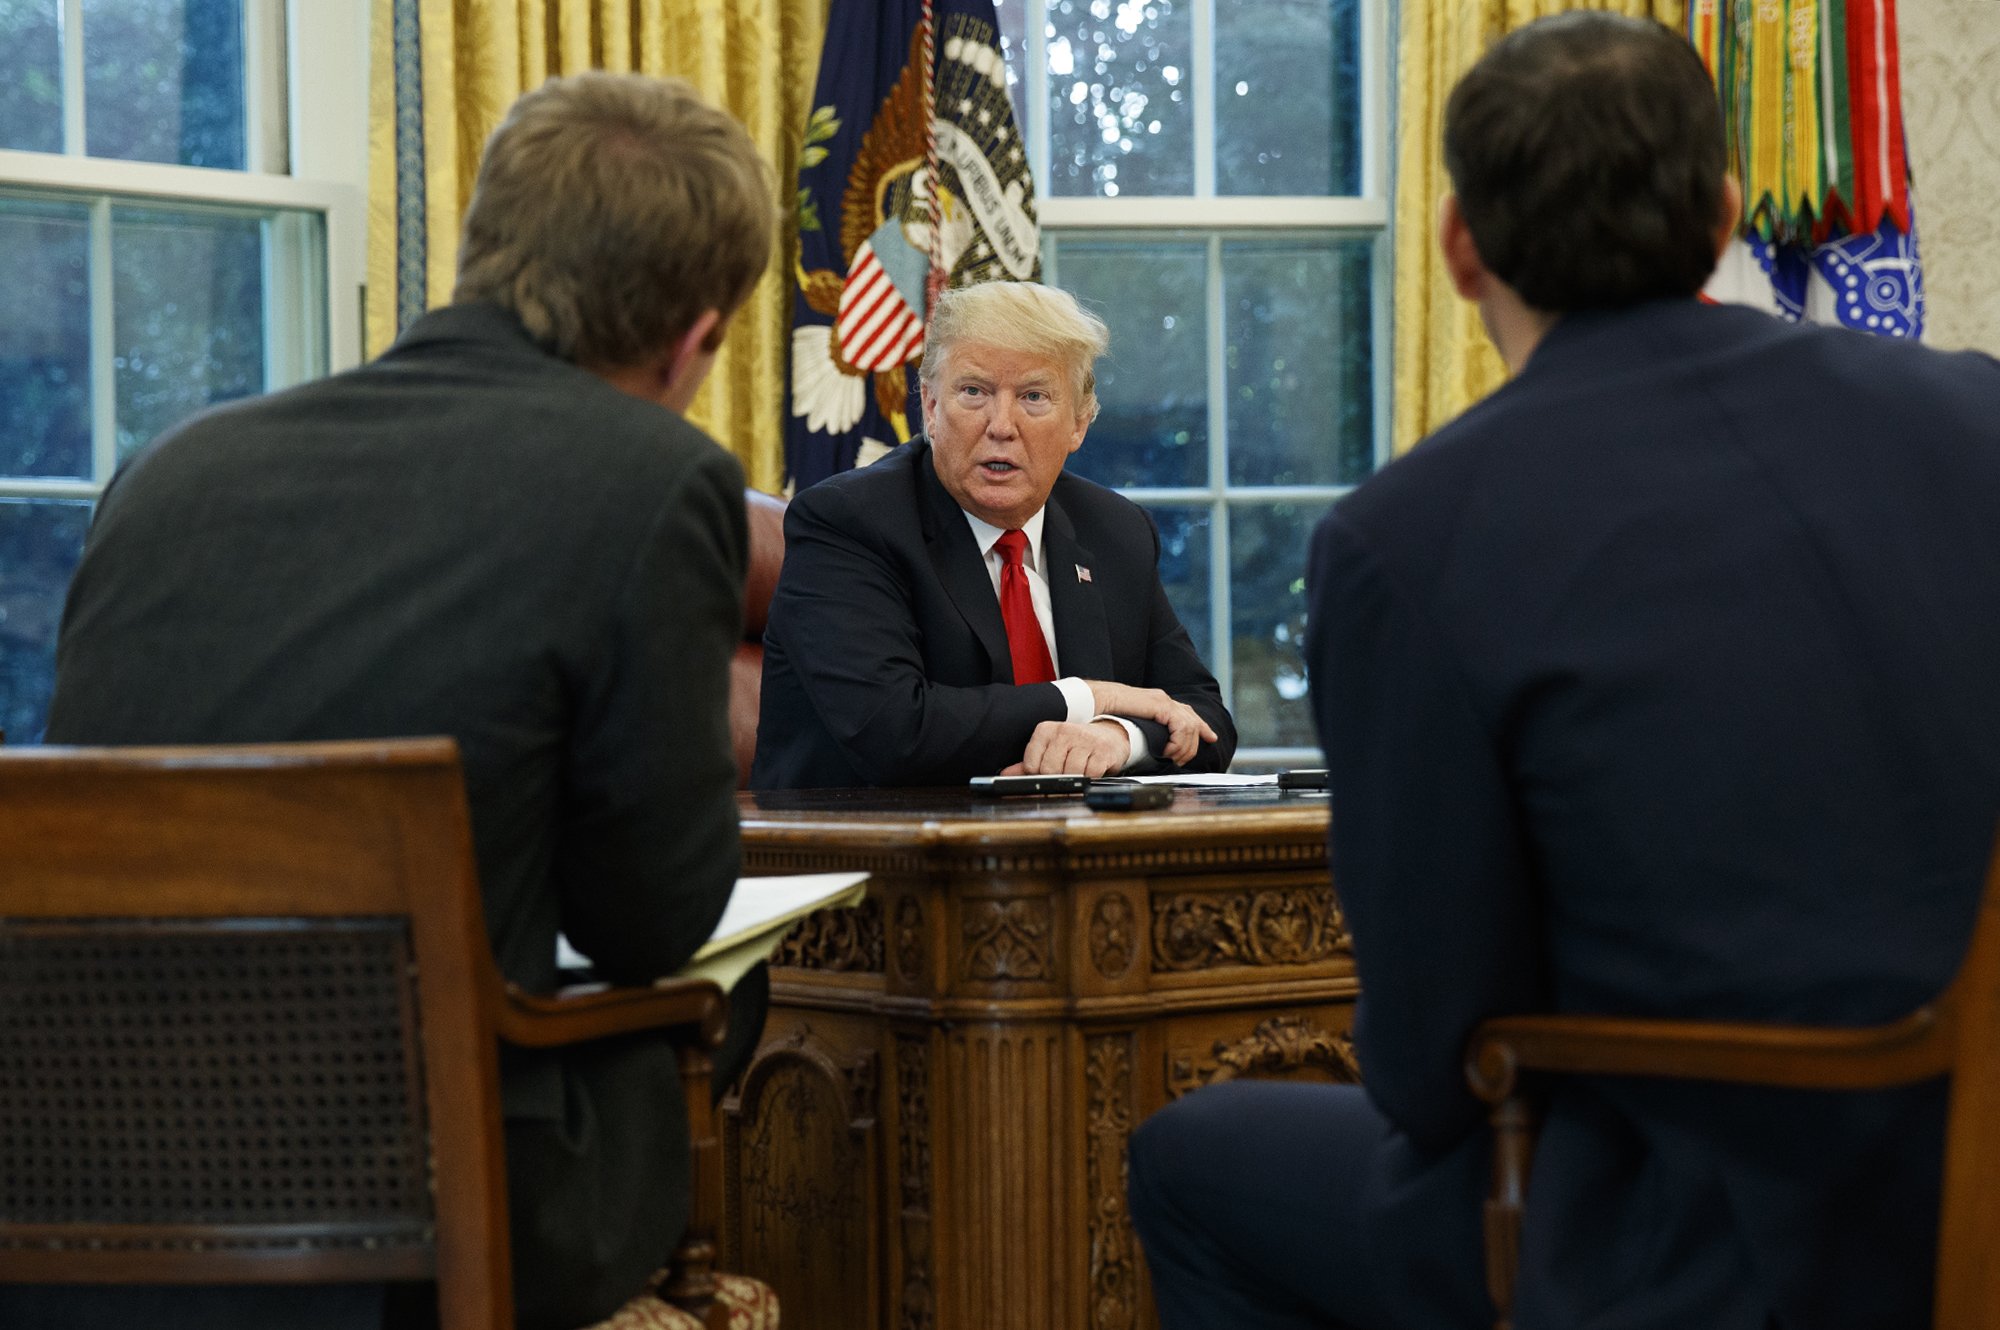 President Donald Trump speaks during an interview with The Associated Press in the Oval Office of the White House on Tuesday in Washington. | AP Photo/Evan Vucci